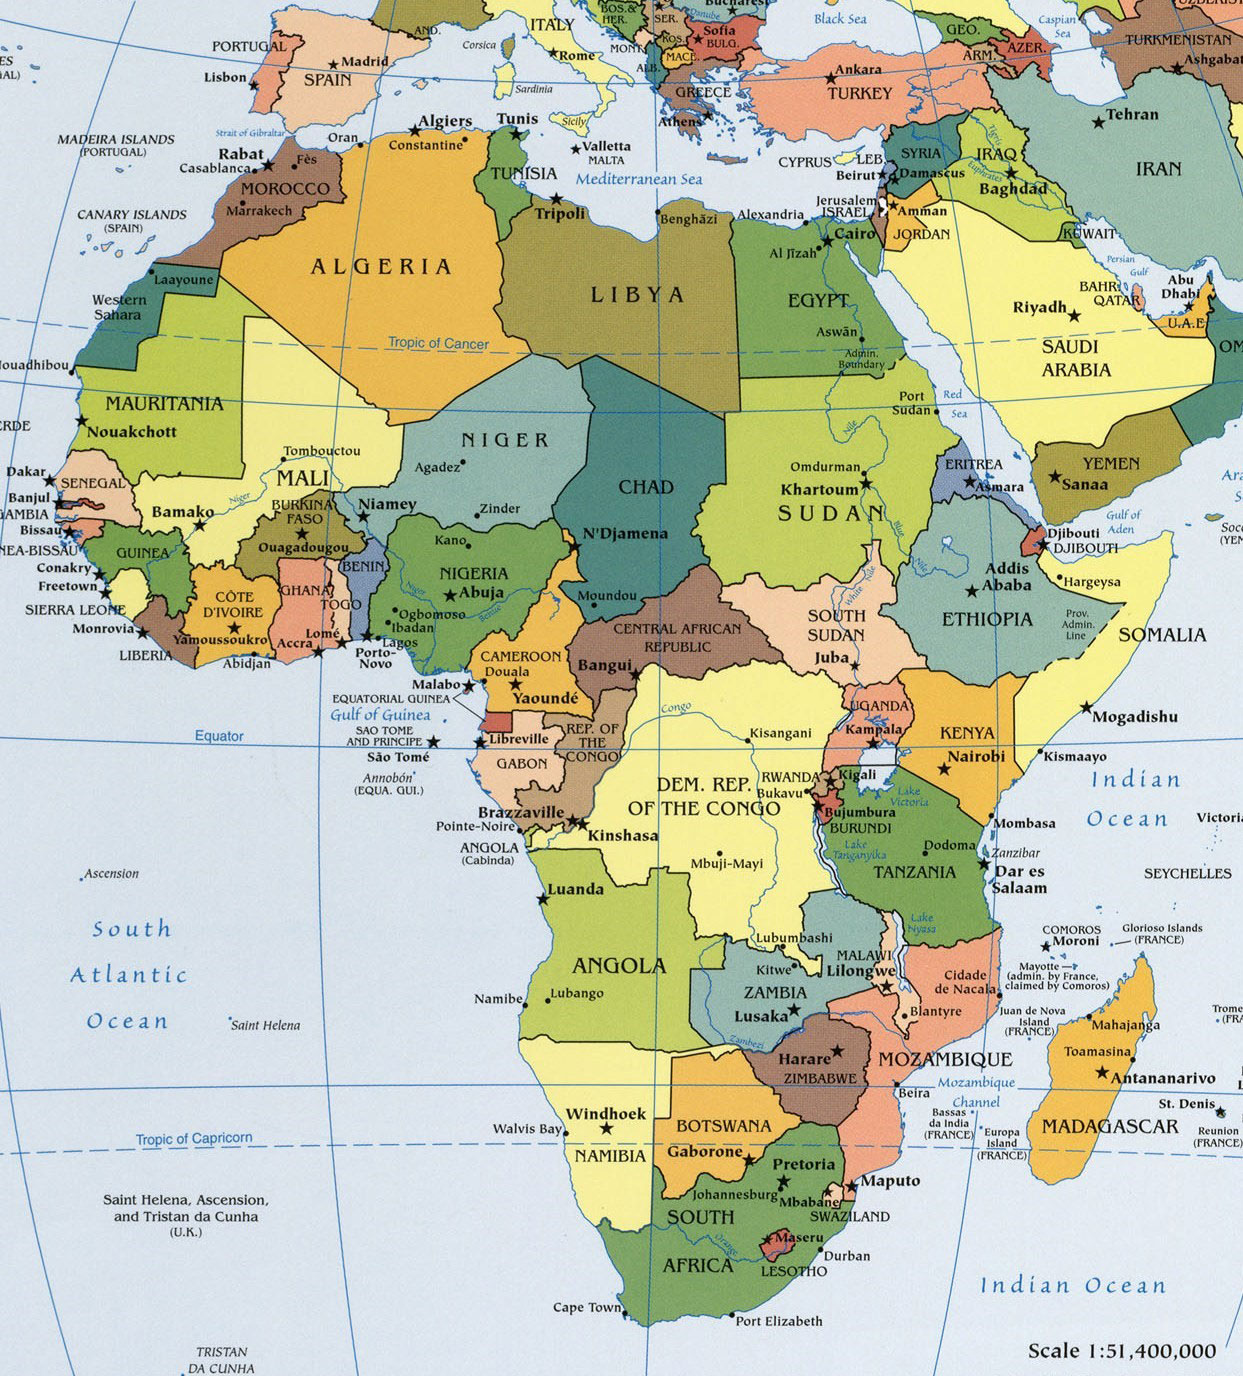 Both Egypt and Zambia are in Africa…but Lebanon makes this map as well, a little further north!